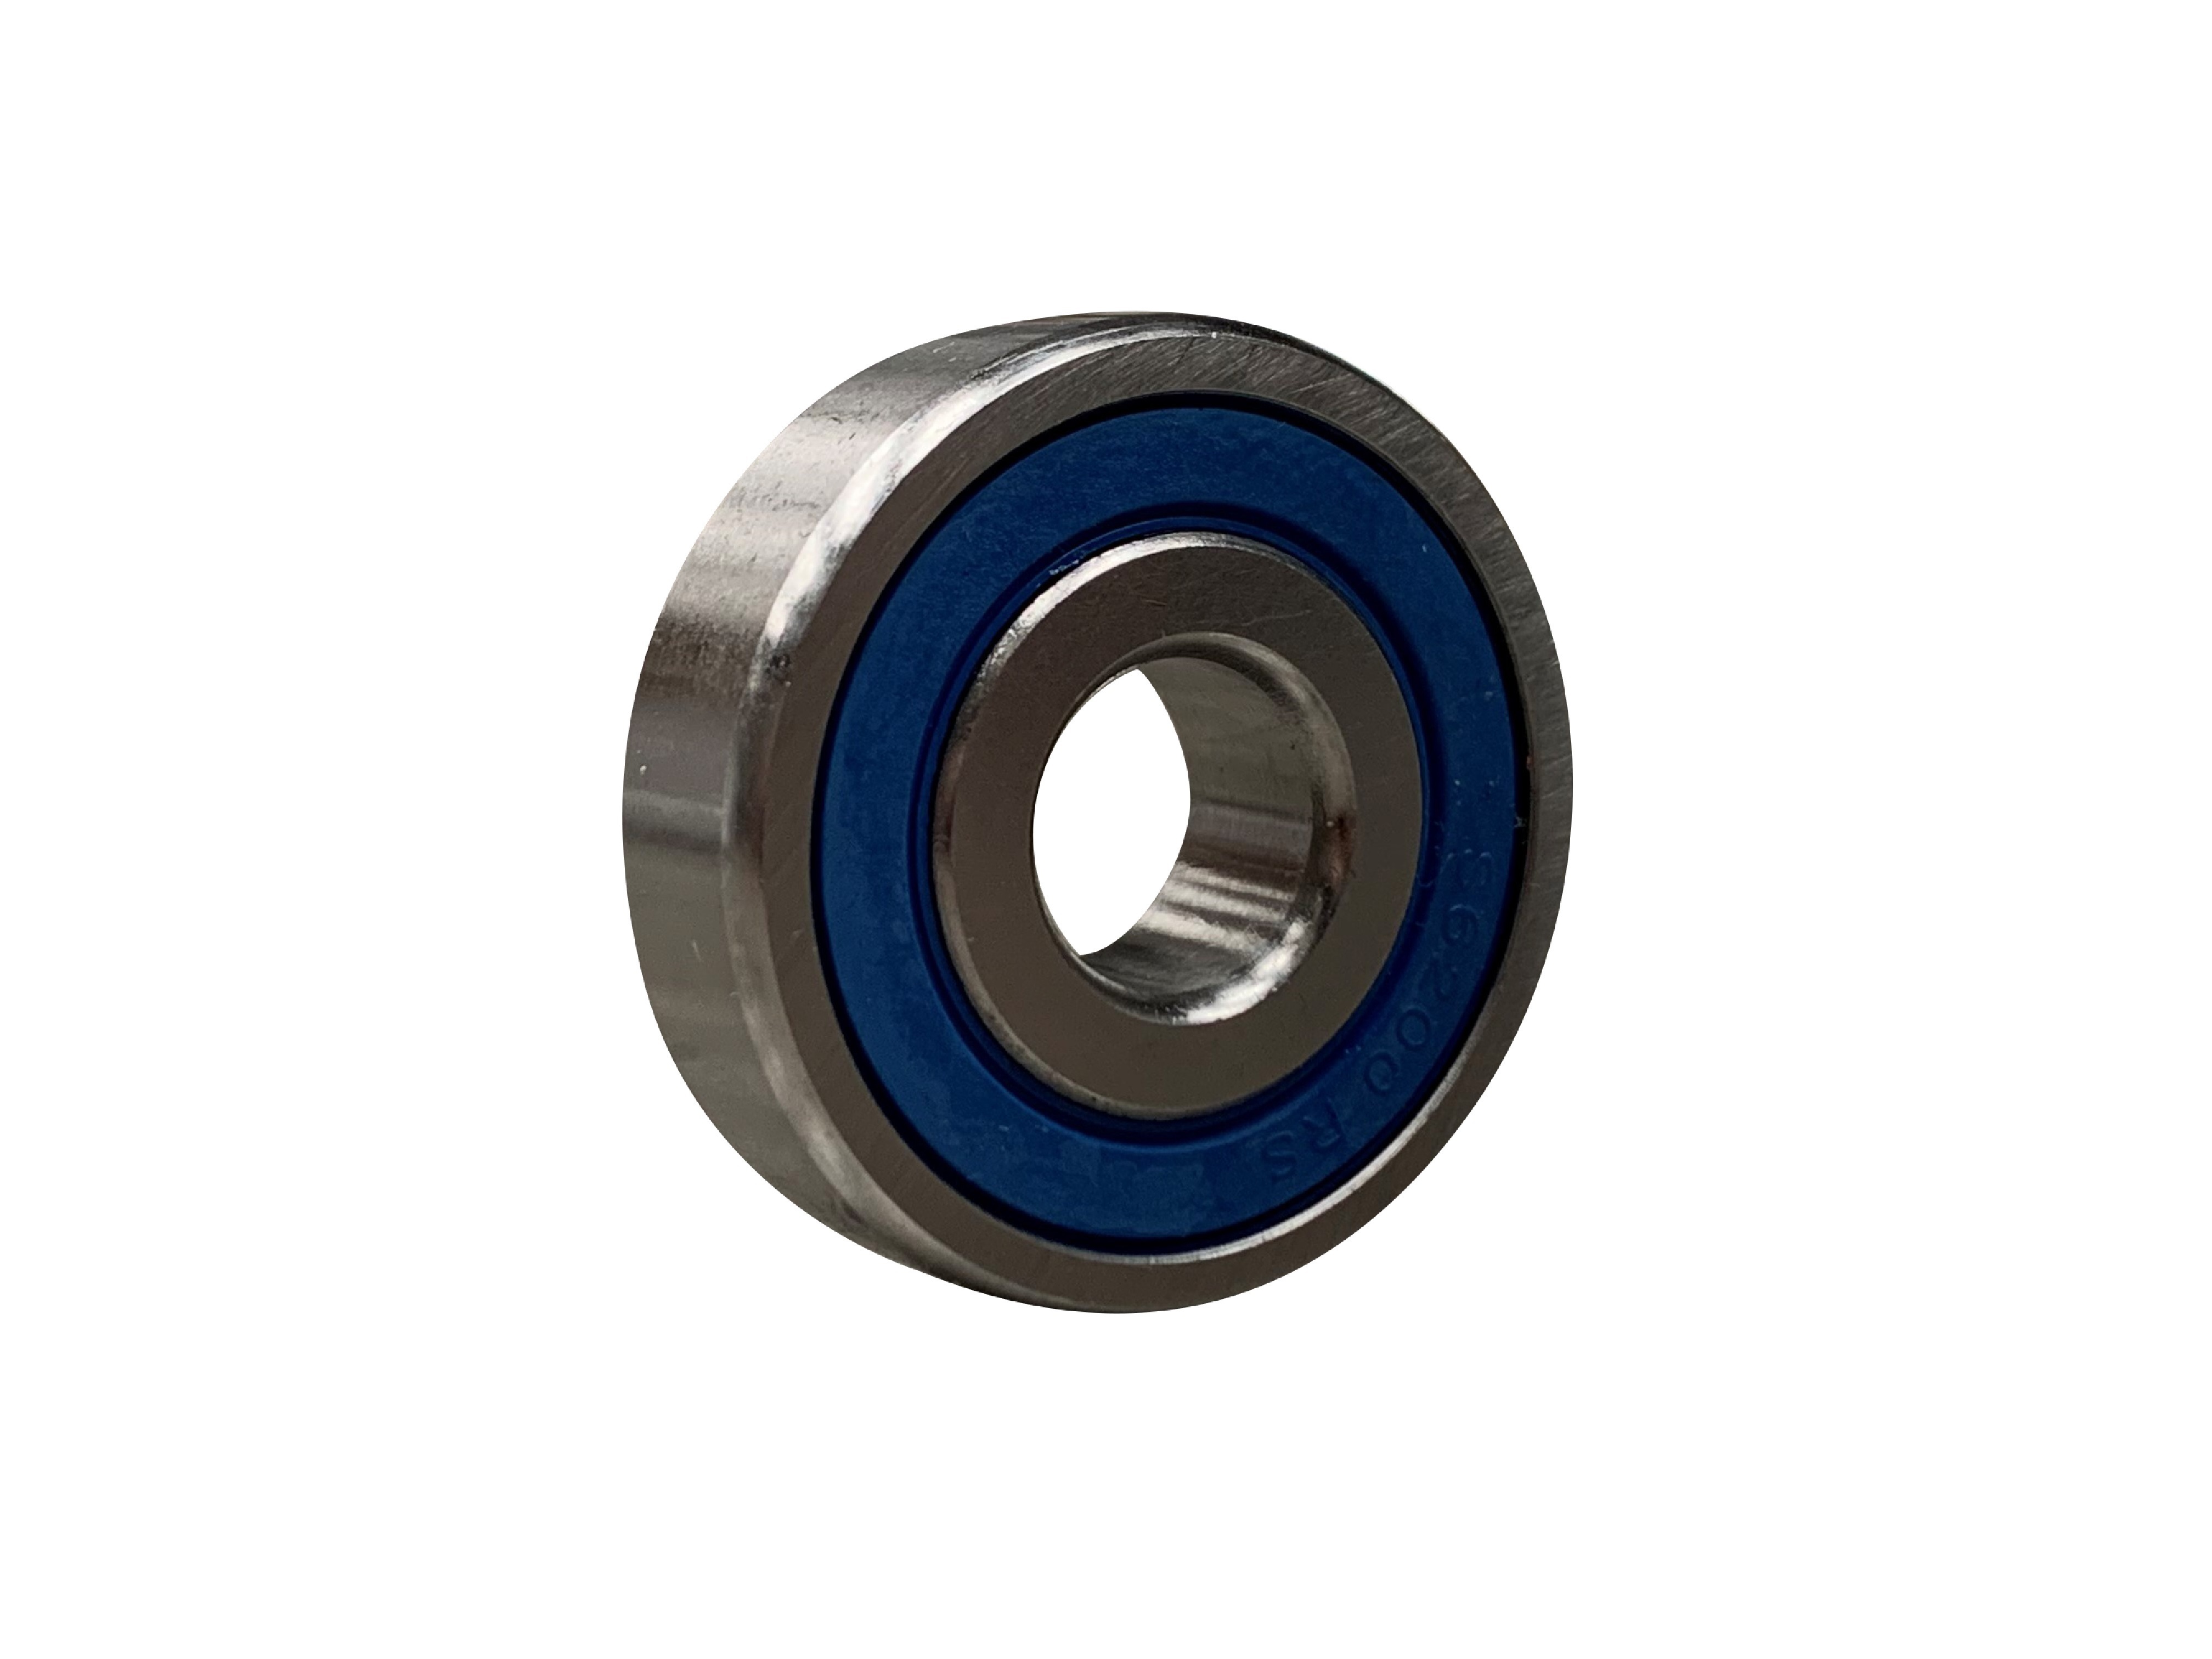 MJ1/2-2RS Imperial Sealed Ball Bearing (RMS4-2RS) 1/2 x 1-5/8 x 5/8